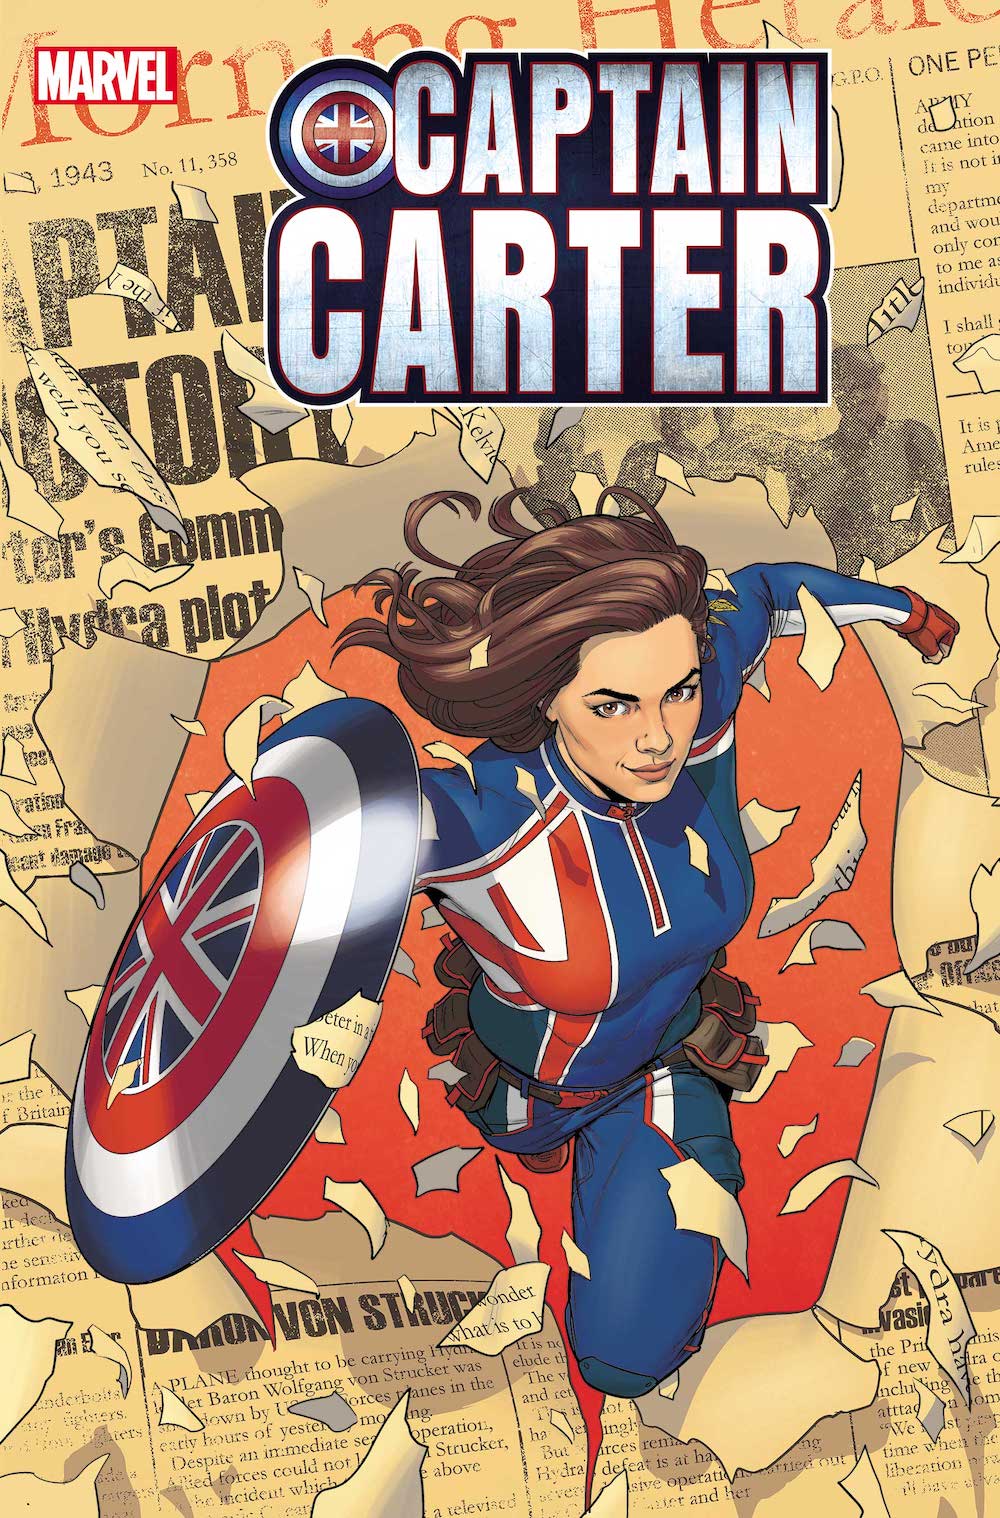 Exclusive: Jamie McKelvie teases woman out-of-time-liness of his ‘Captain Carter’ miniseries